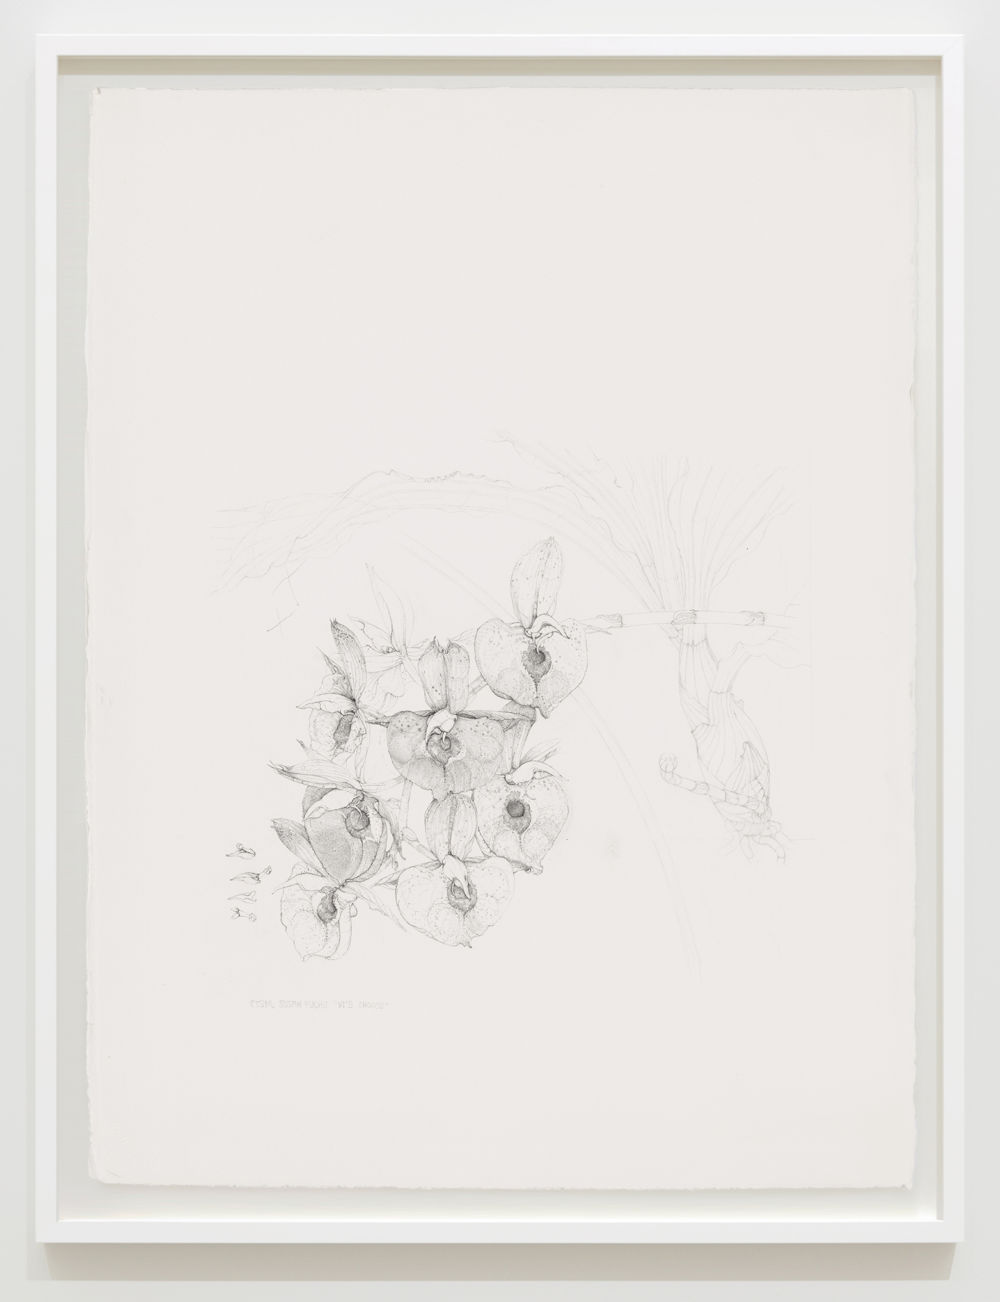 ​Charmian Johnson, CTSM. Susan Fuchs “Vi’s Choice”, unknown date, ink and graphite on paper, 34 x 26 in. (85 x 65 cm) by 